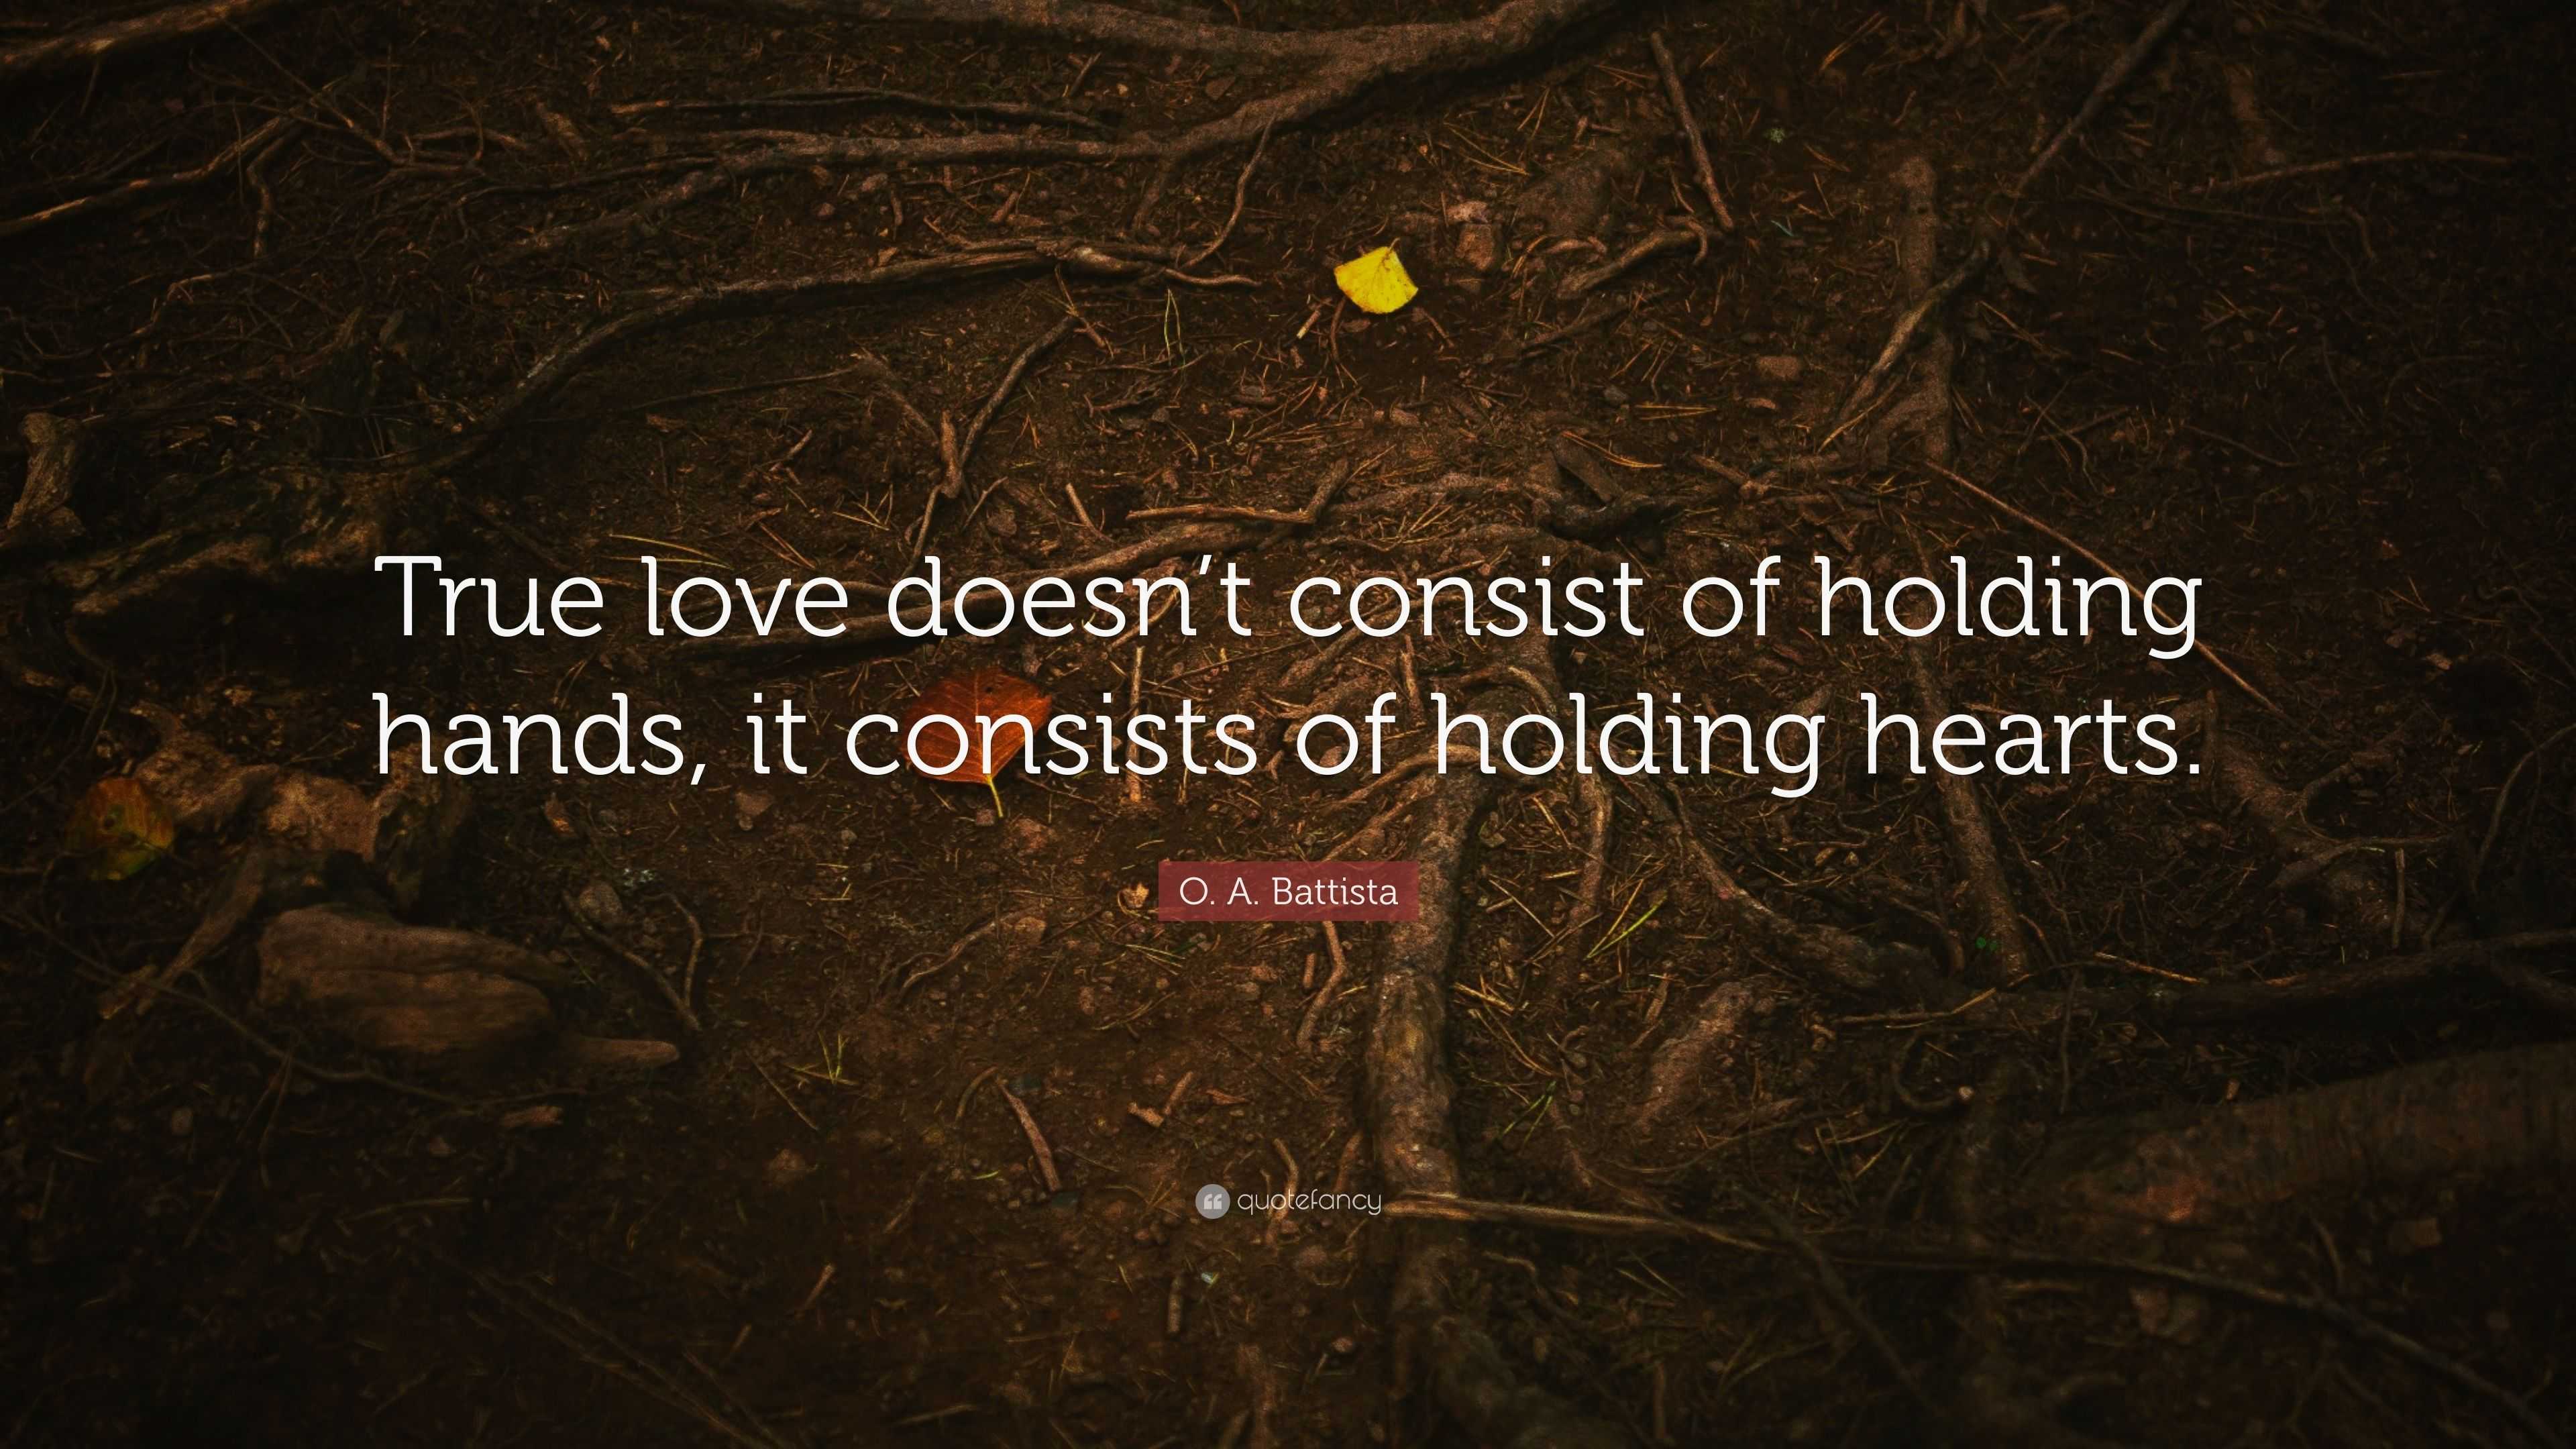 Quotes hands love on holding Short Love